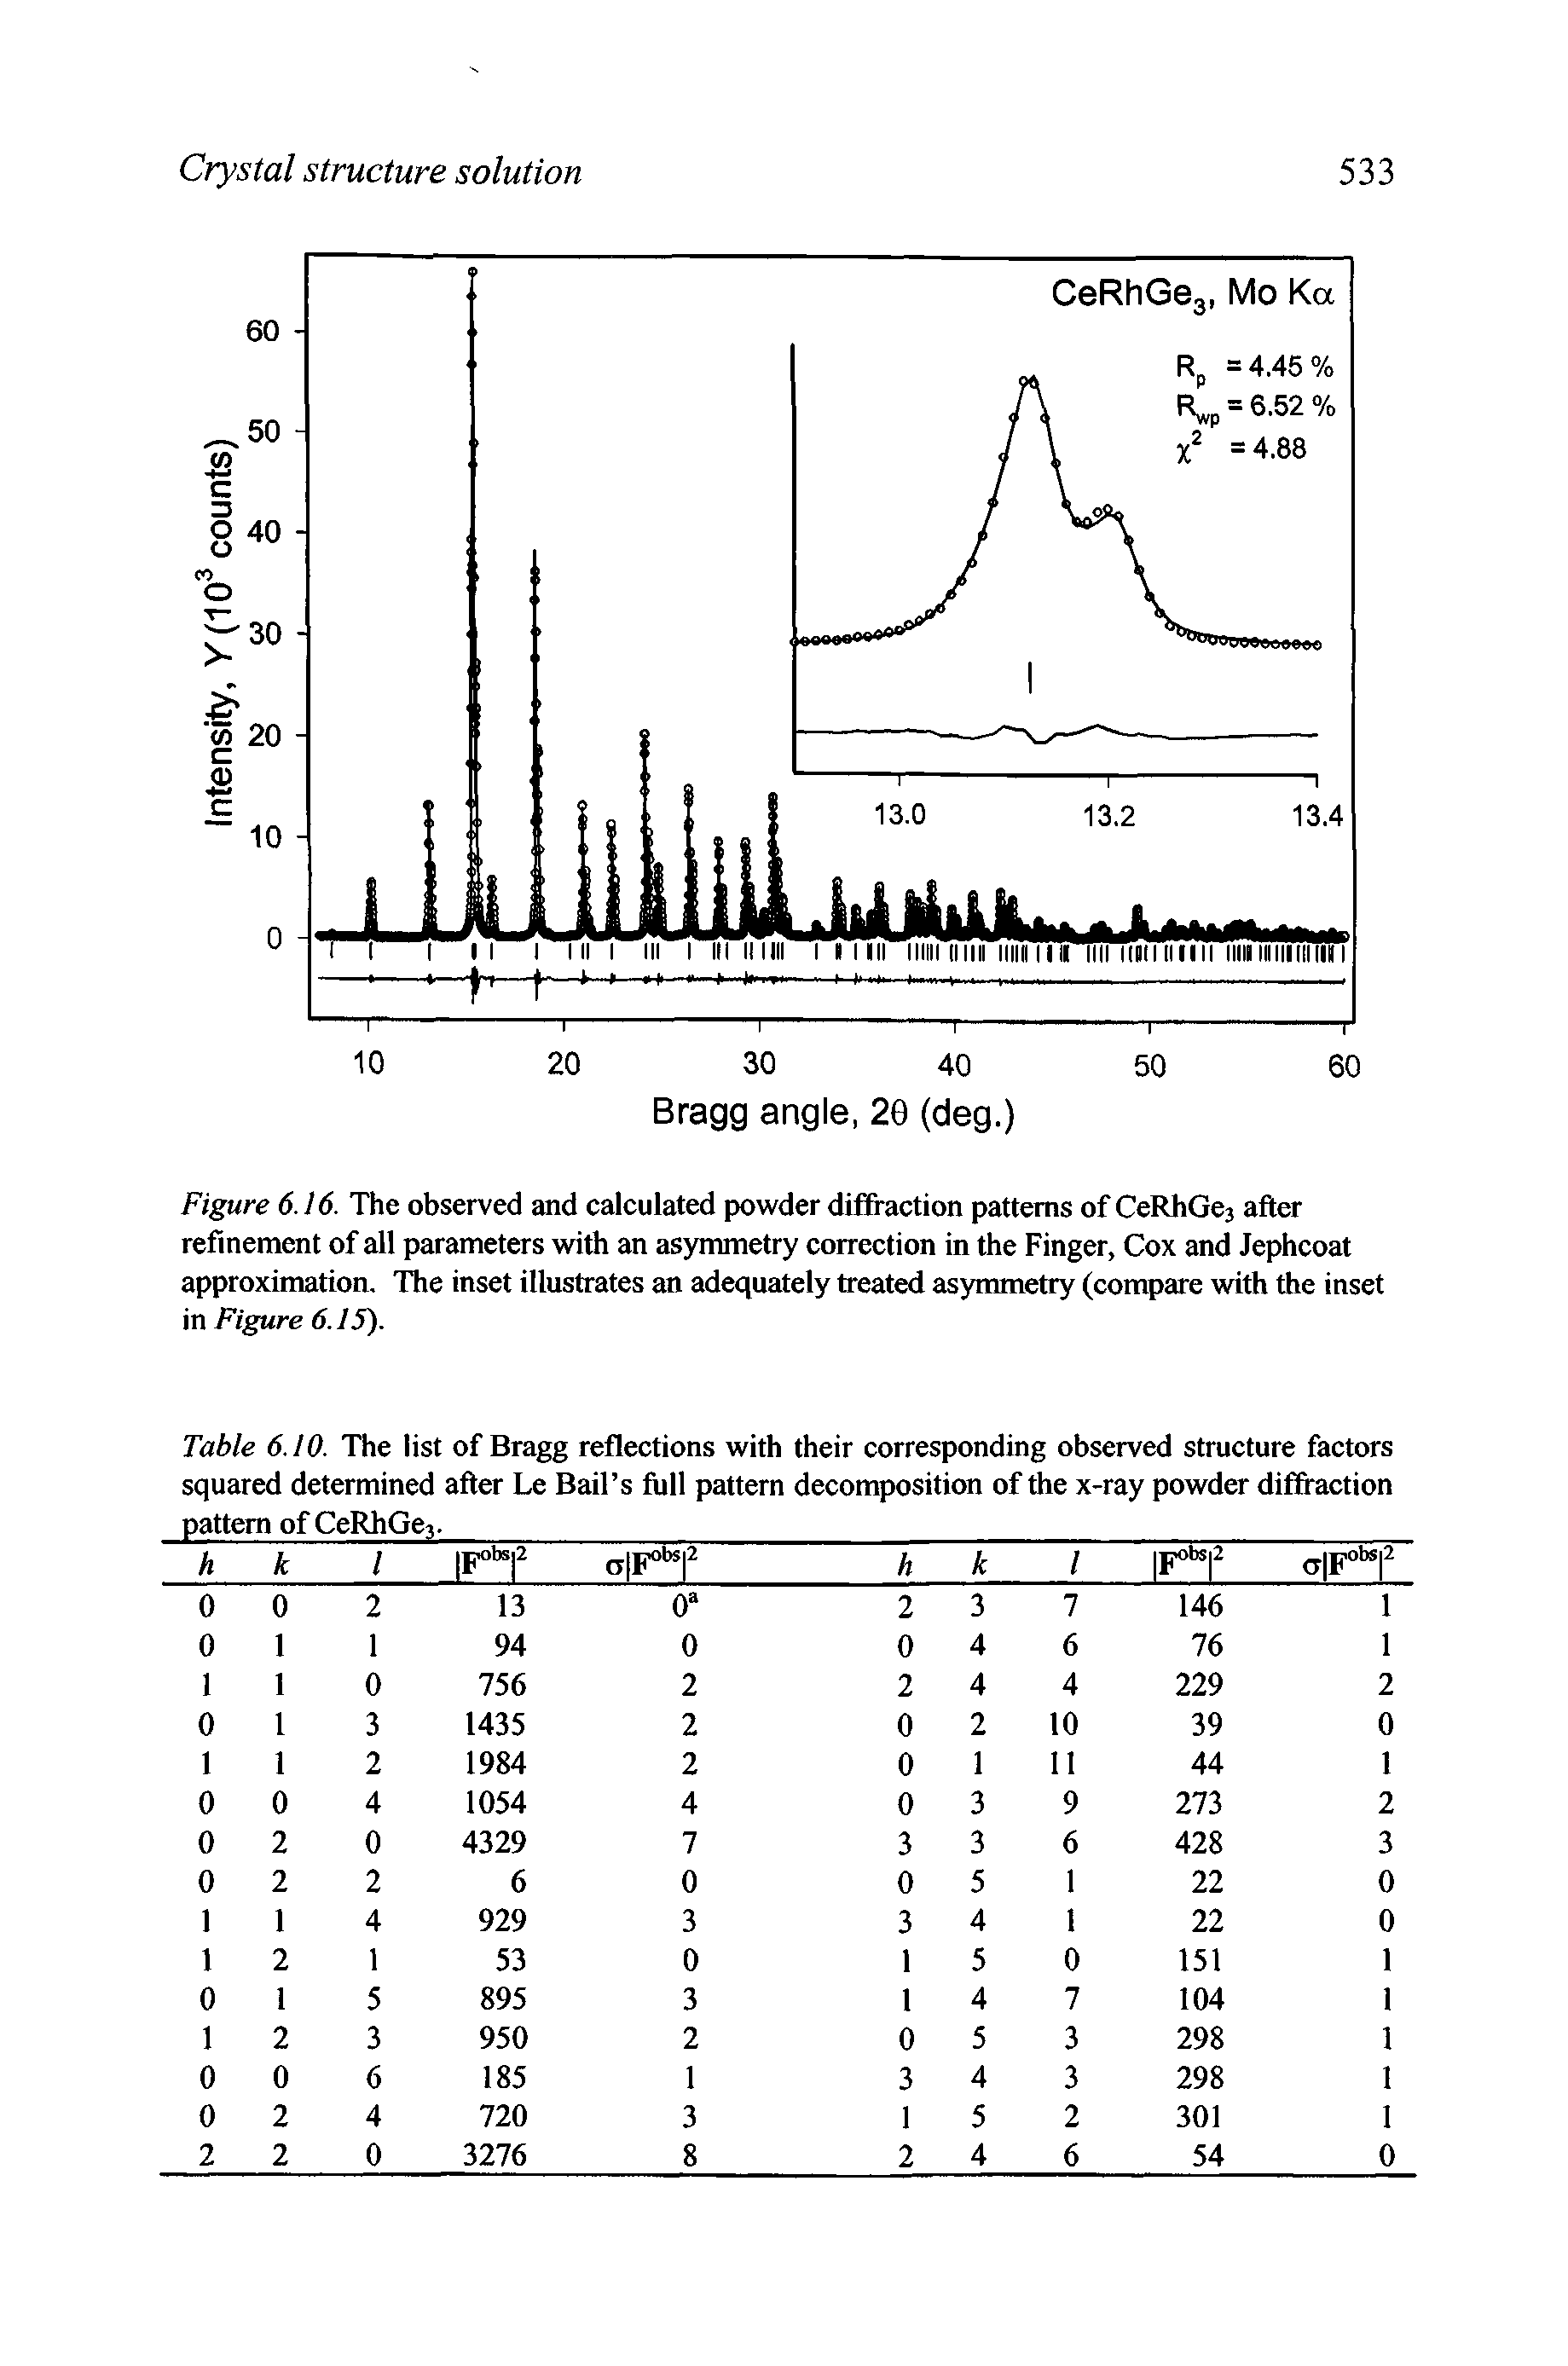 Figure 6.16. The observed and calculated powder dififraction patterns of CeRhGes after refinement of all parameters with an asymmetry correction in the Finger, Cox and Jephcoat approximation. The inset illustrates an adequately treated asymmetry (compare with the inset in Figure 6.15).